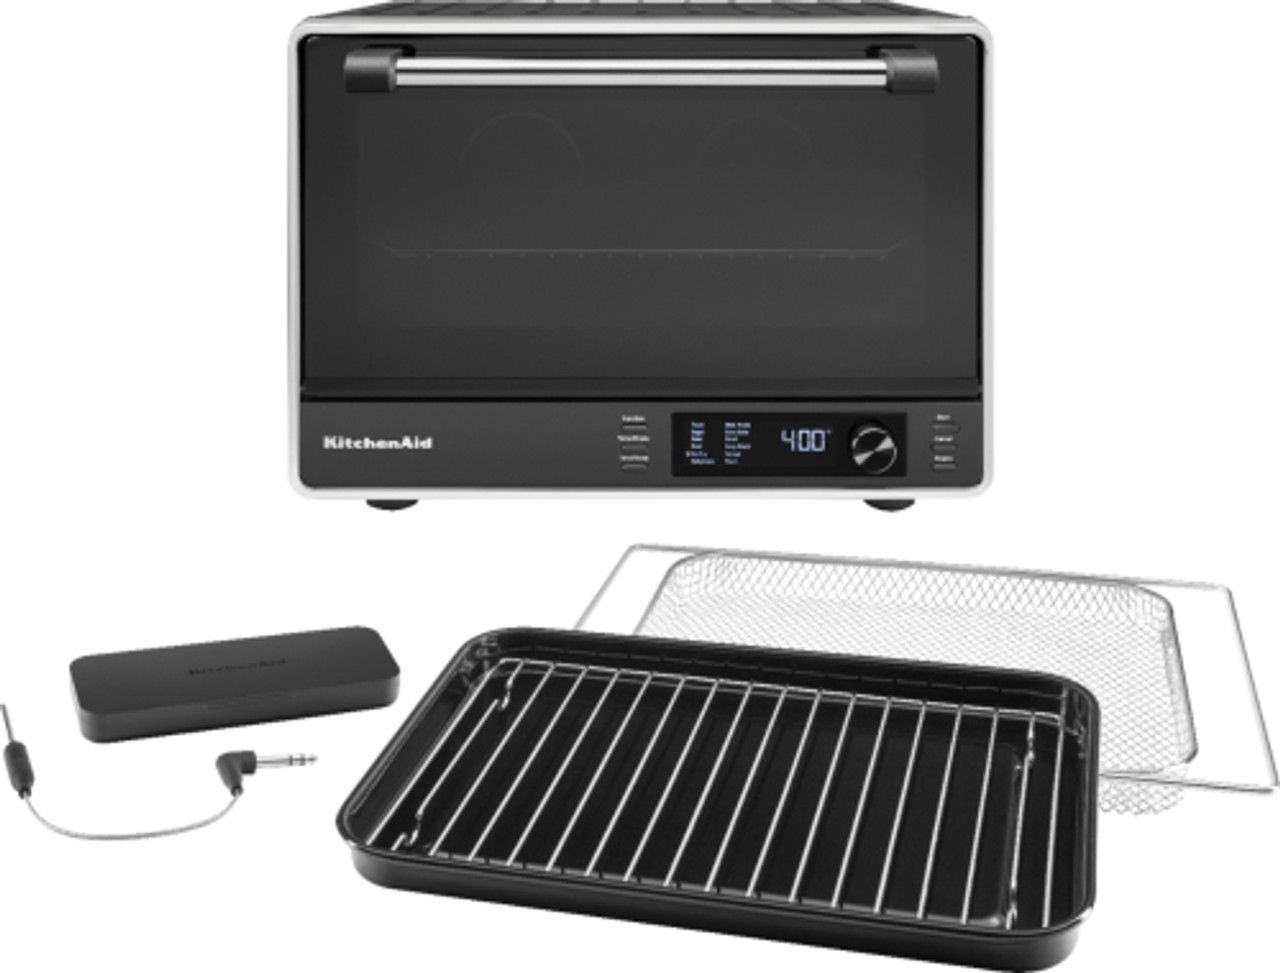 KitchenAid - Dual Convection Countertop Oven with Air Fry - Black Matte